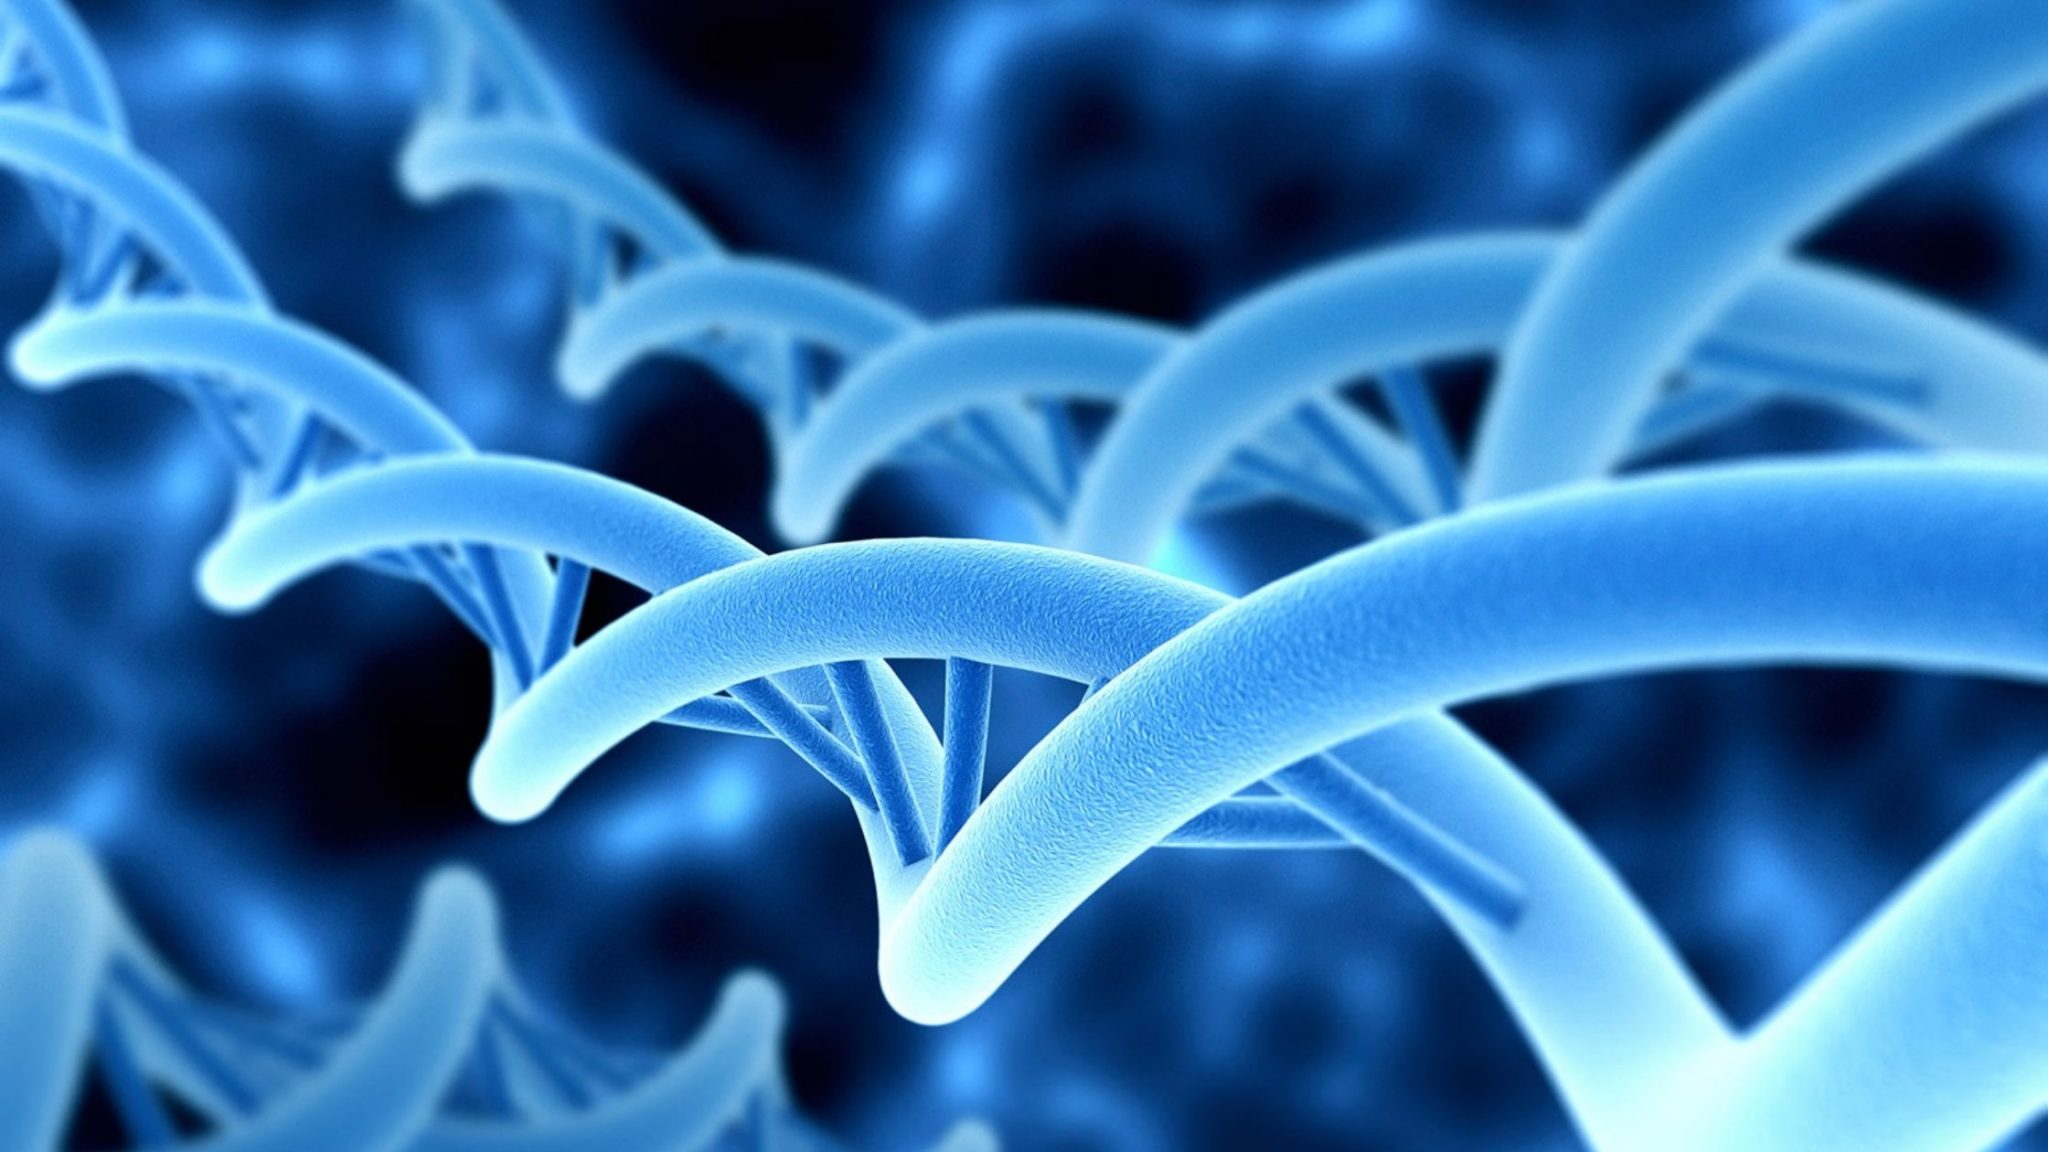 benefits-of-having-your-genome-sequenced-dna-test-us-dna-test